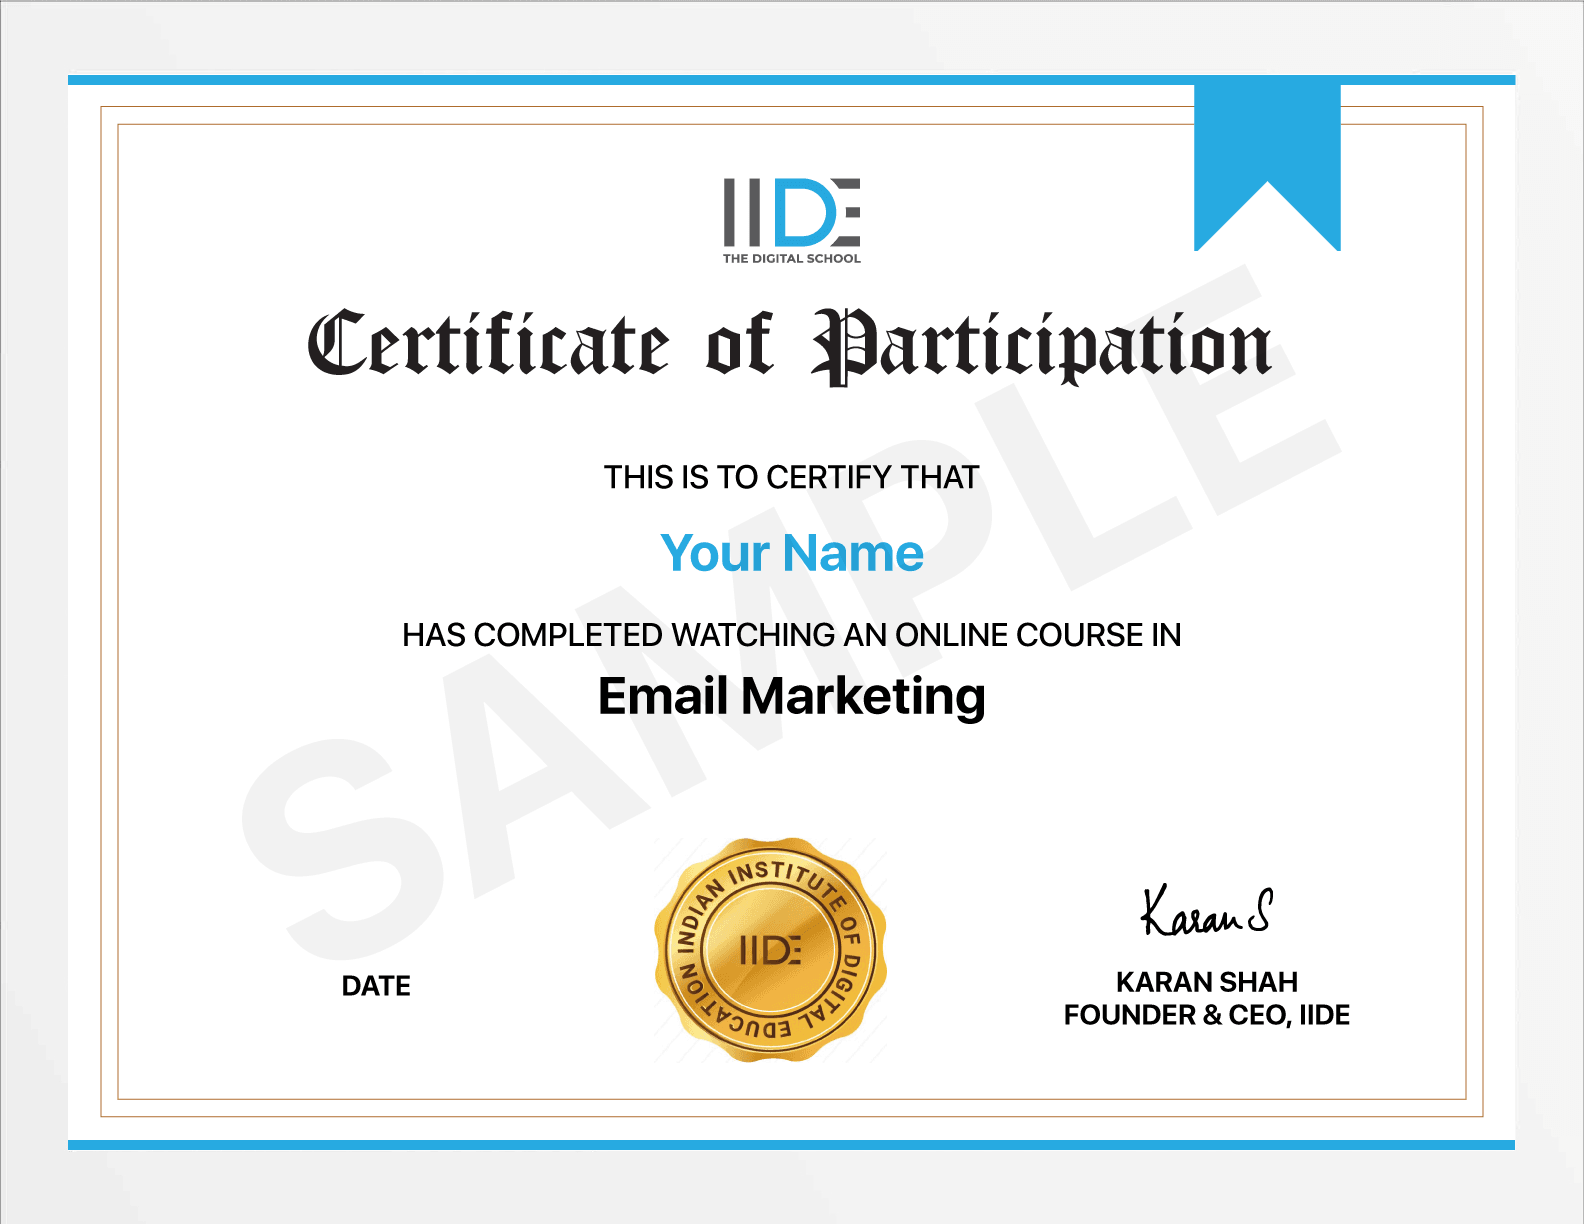 Email Marketing Course Online - Certificate